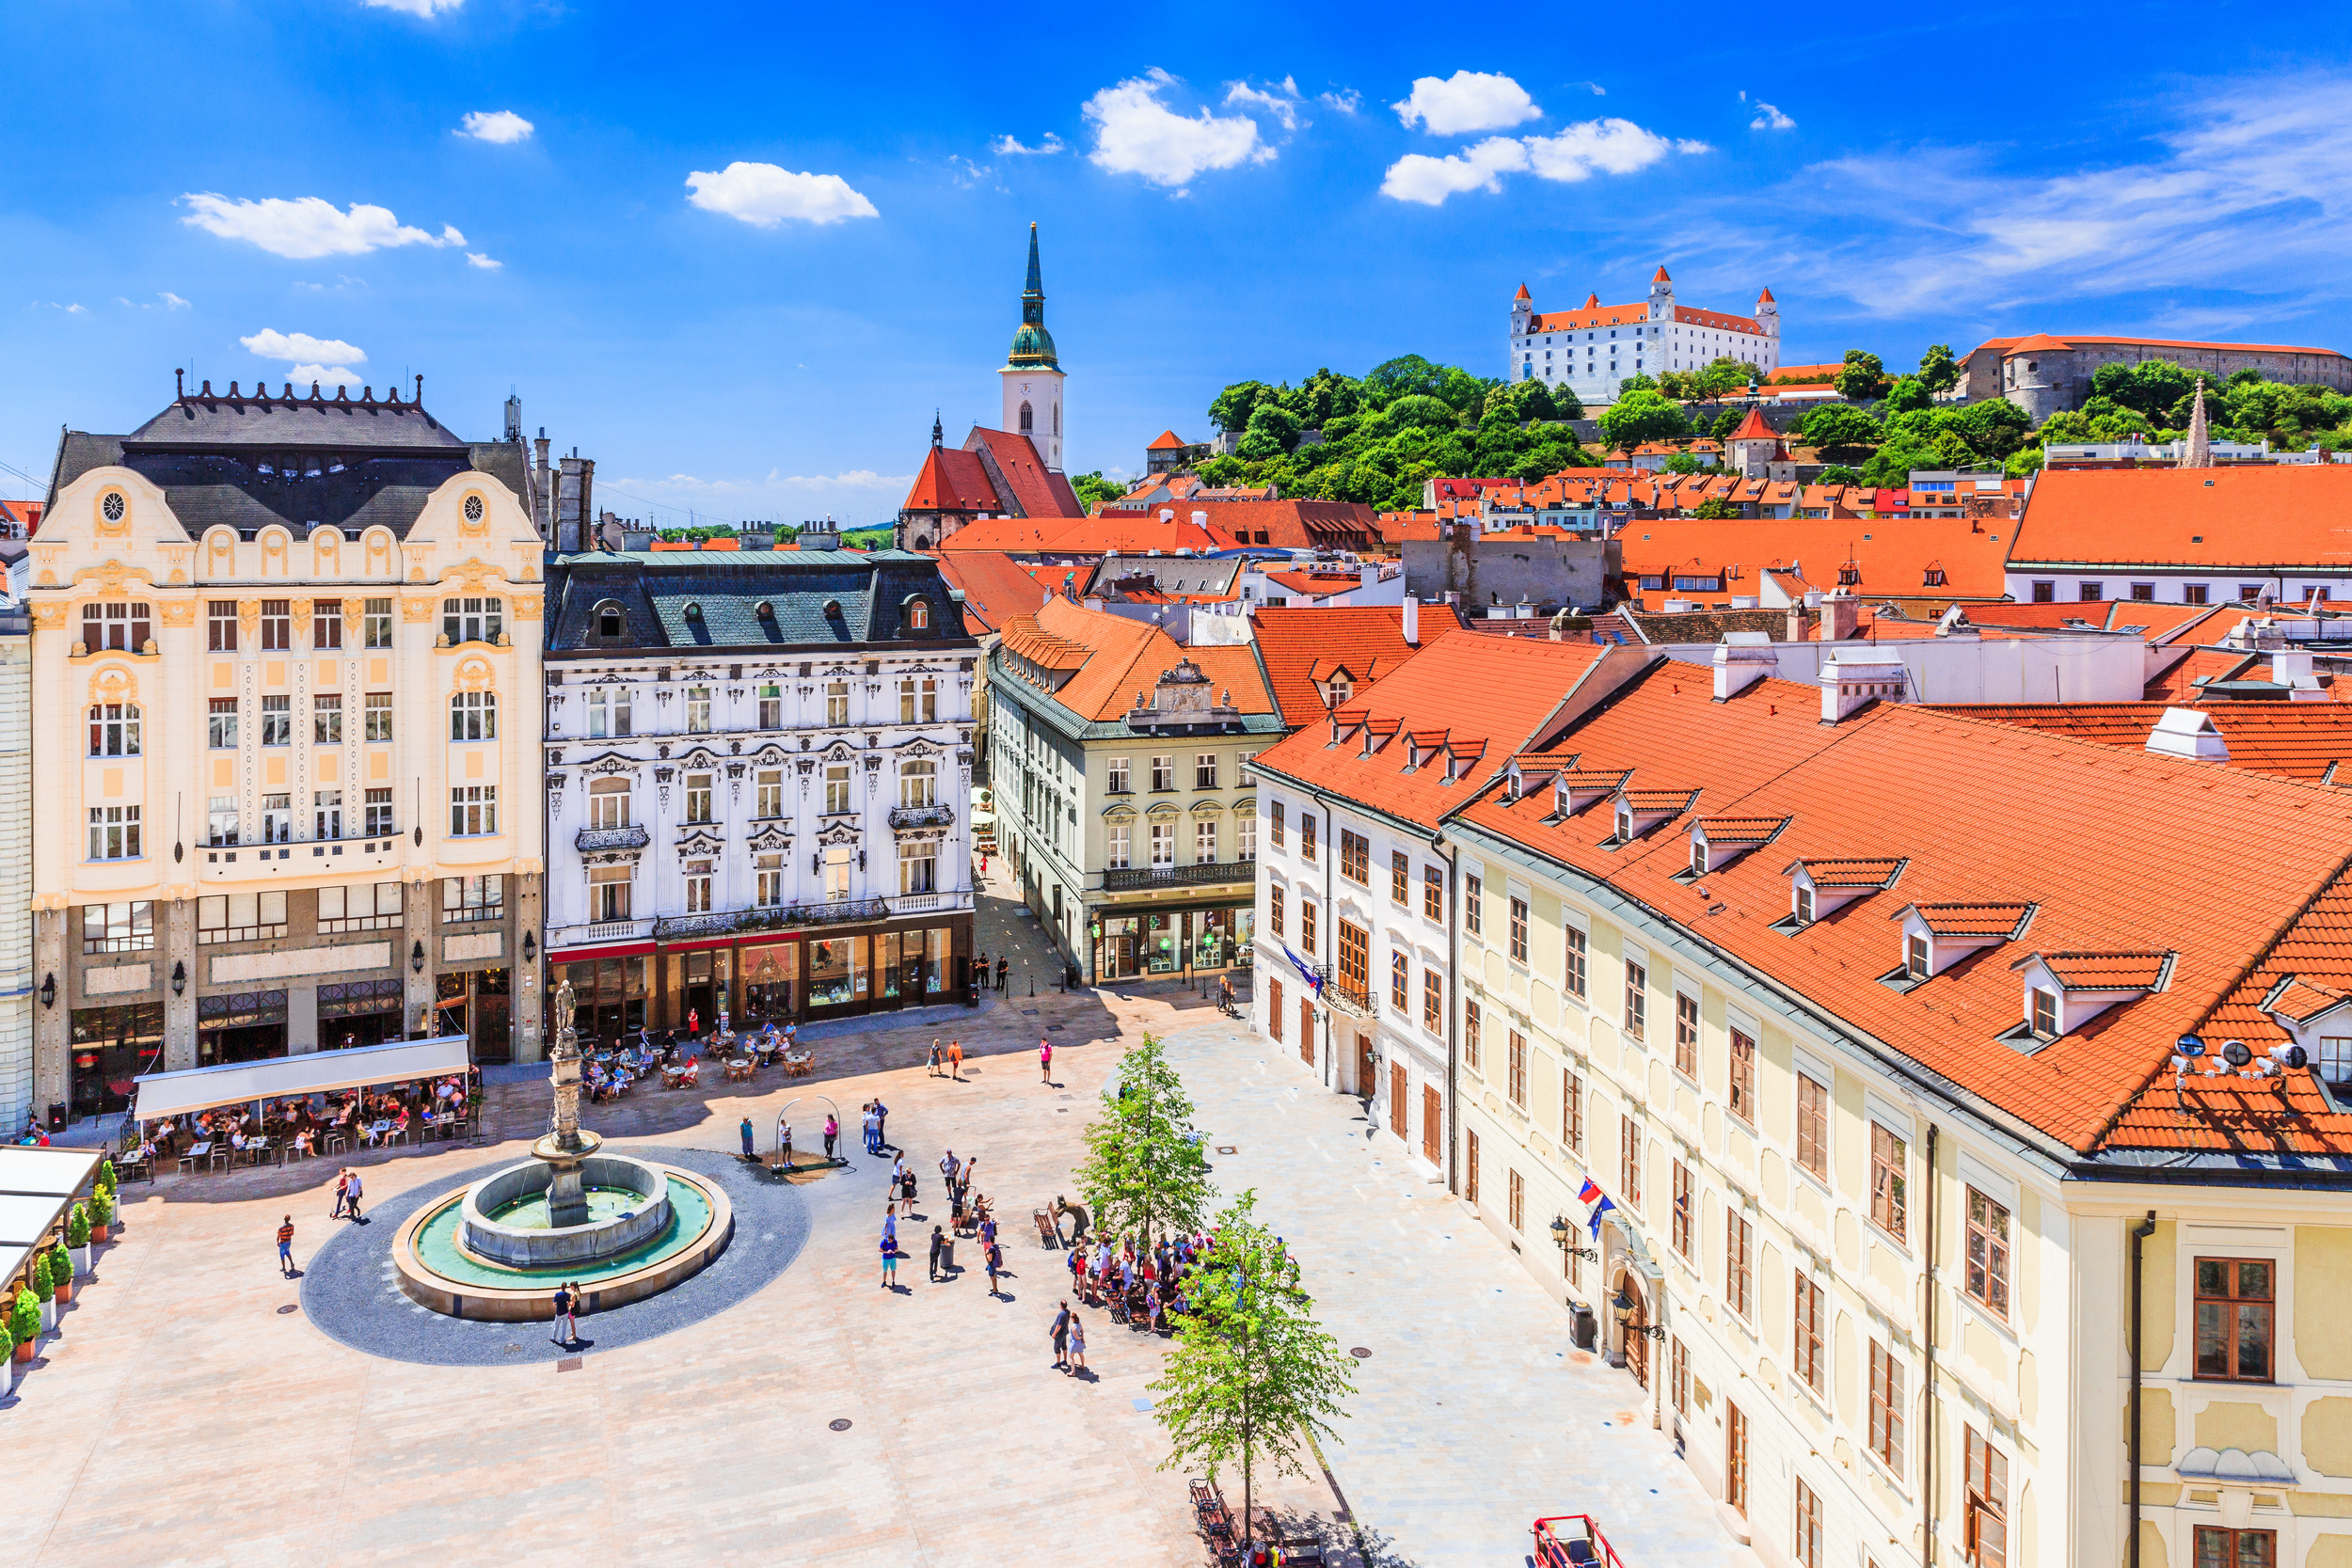 <p>Bratislava is a terrific, lesser-known place to visit once the weather warms up a bit. Stroll around the Nove Mesto neighborhood before checking out the castle. And then, if you have time, head up to the Tatras Mountains, just a few hours' drive away.</p><p>You may also like: <a href='https://www.yardbarker.com/lifestyle/articles/23_things_you_didnt_know_about_pizza_hut_020224/s1__39859726'>23 things you didn’t know about Pizza Hut</a></p>